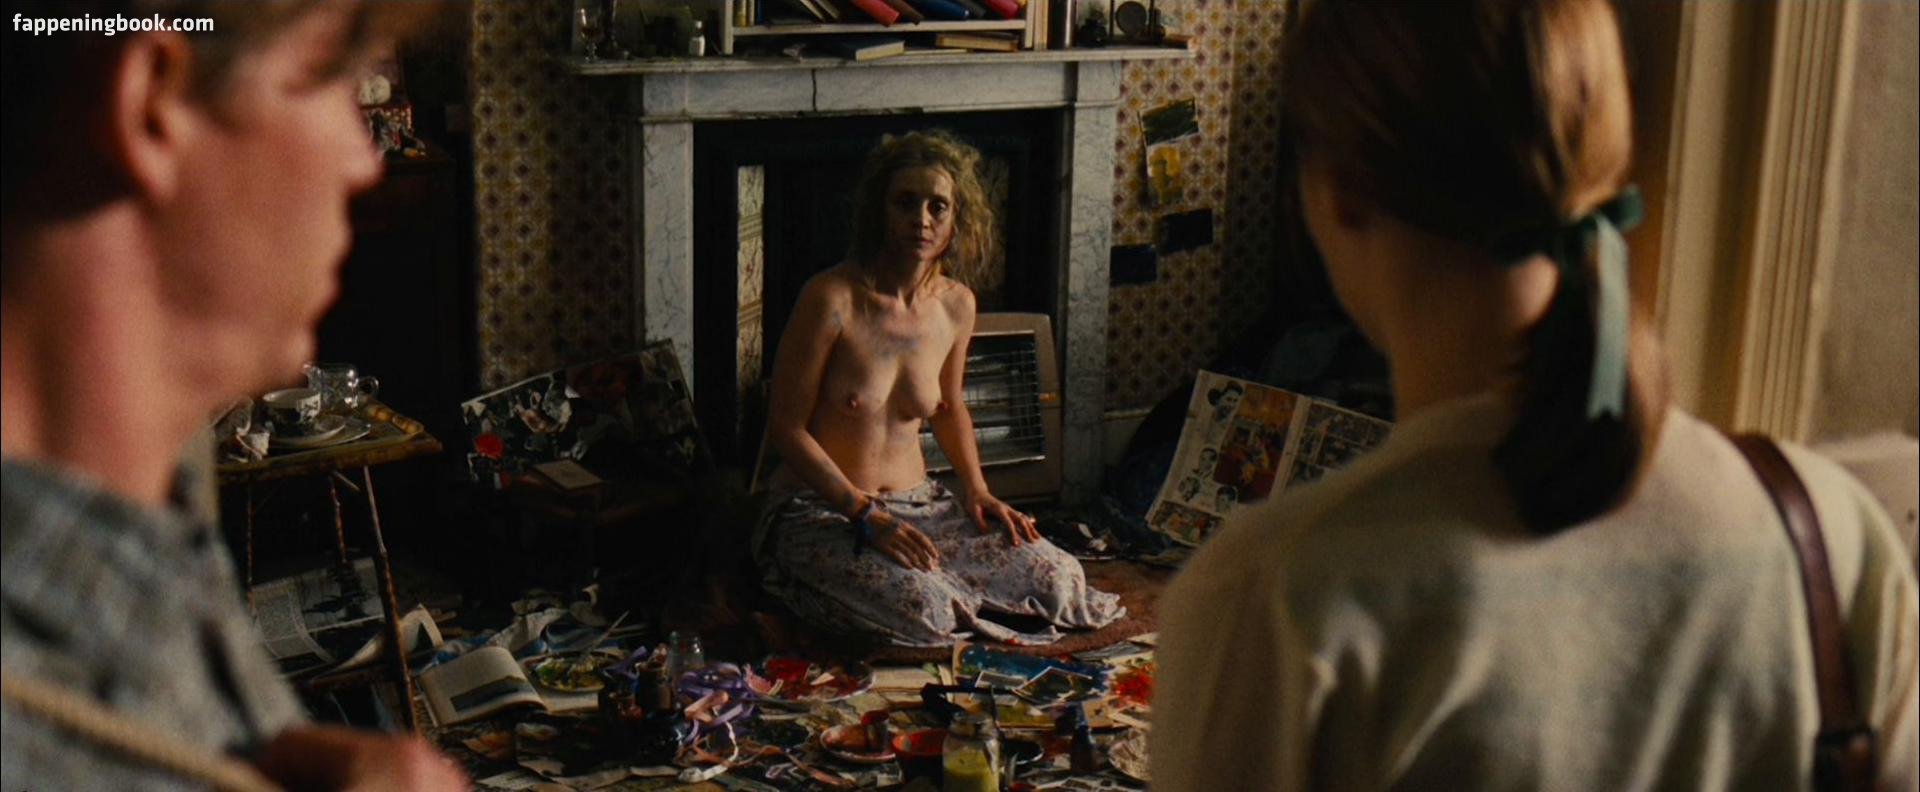 Anne-Marie Duff Nude, The Fappening - Photo #44823 - FappeningBook.